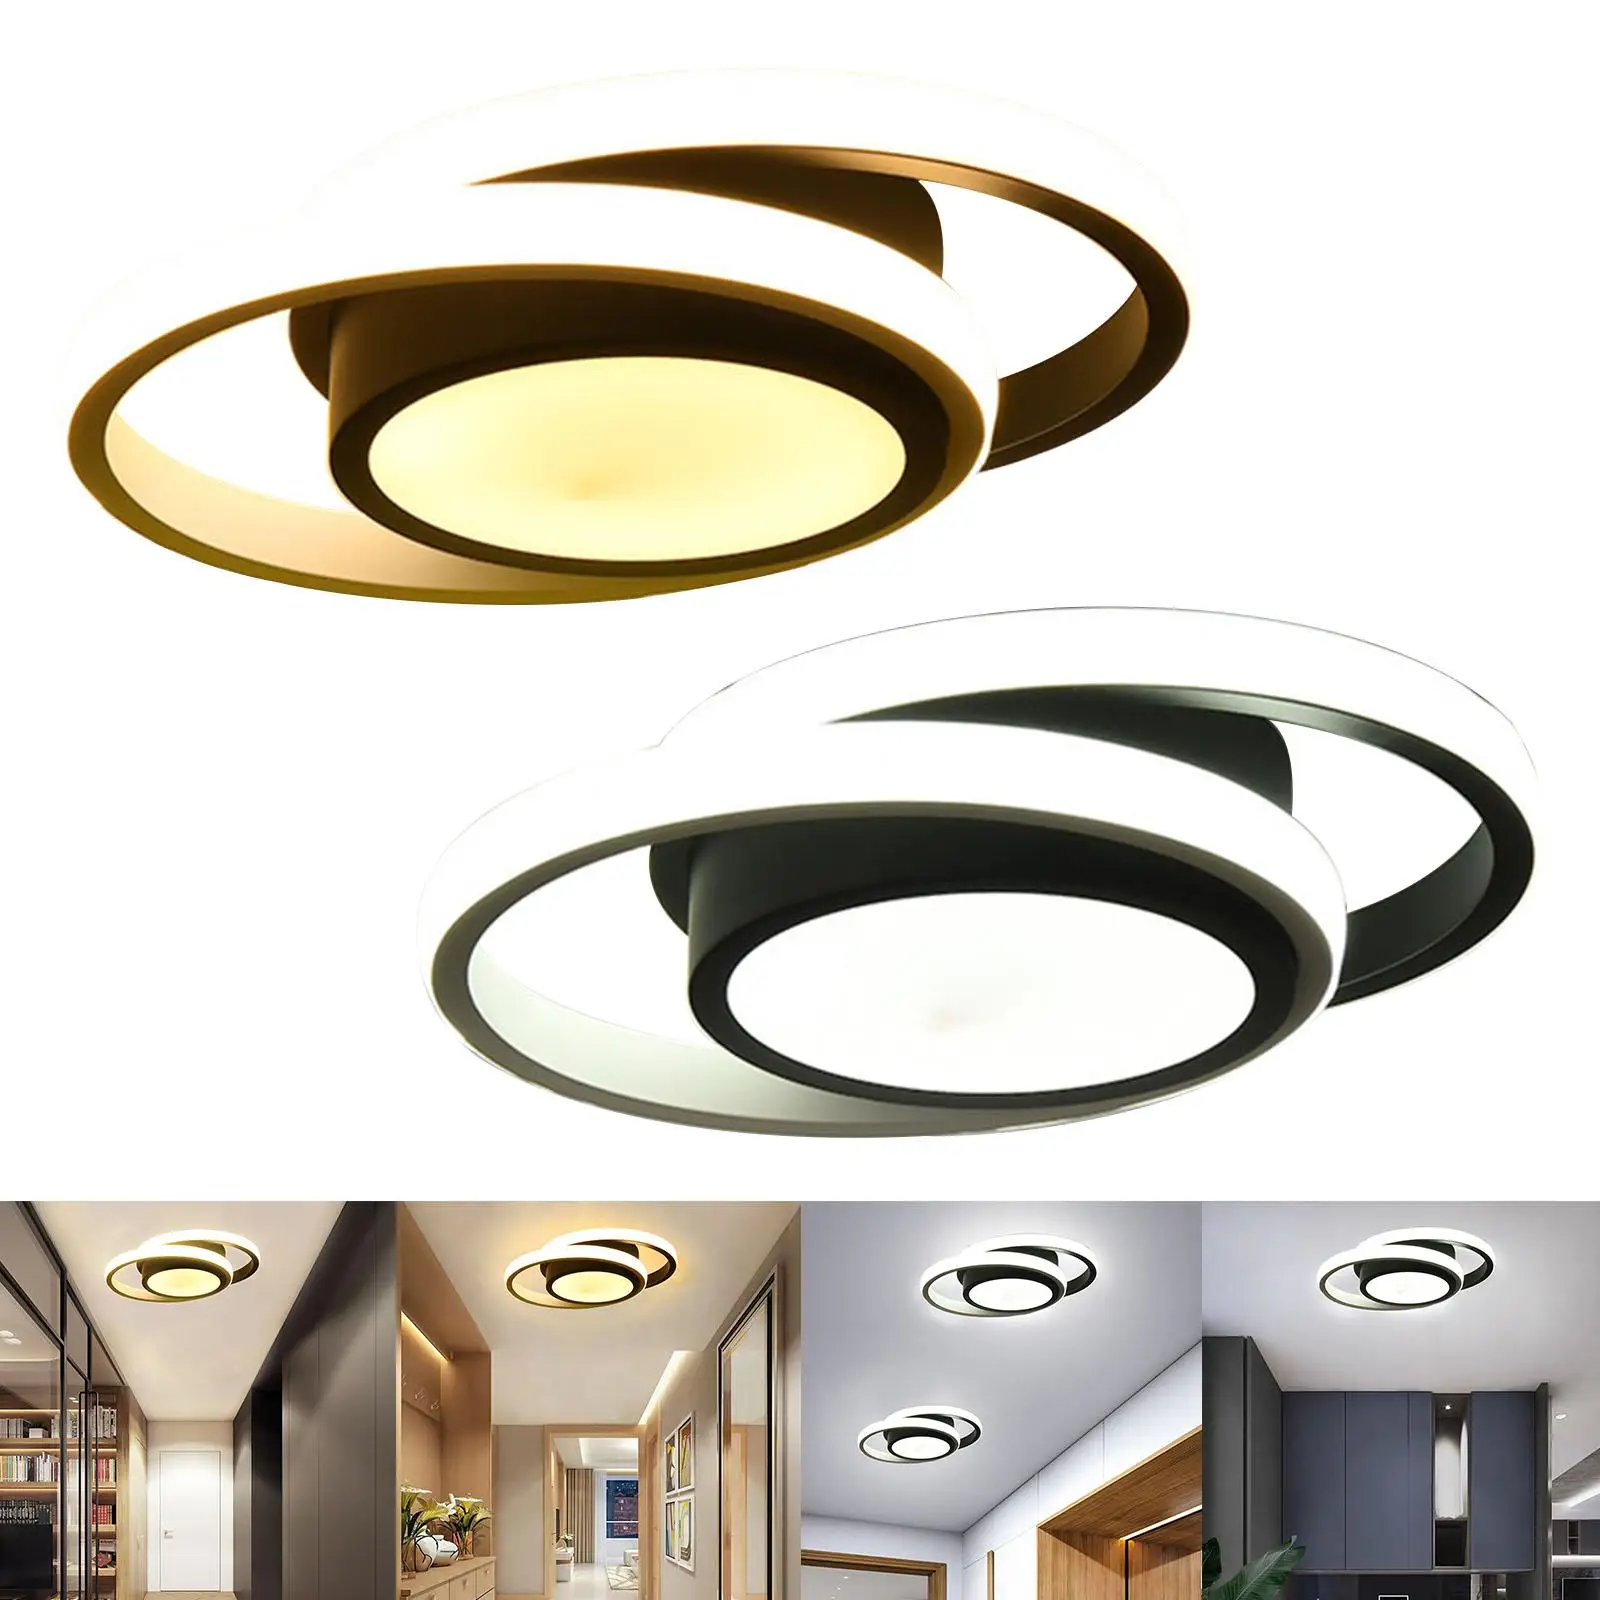 Nordic LED Ceiling Light Chandelier Fixtures Surface Mounted Pendant Light for Aisle Porch Corridor Dining Room Bathroom